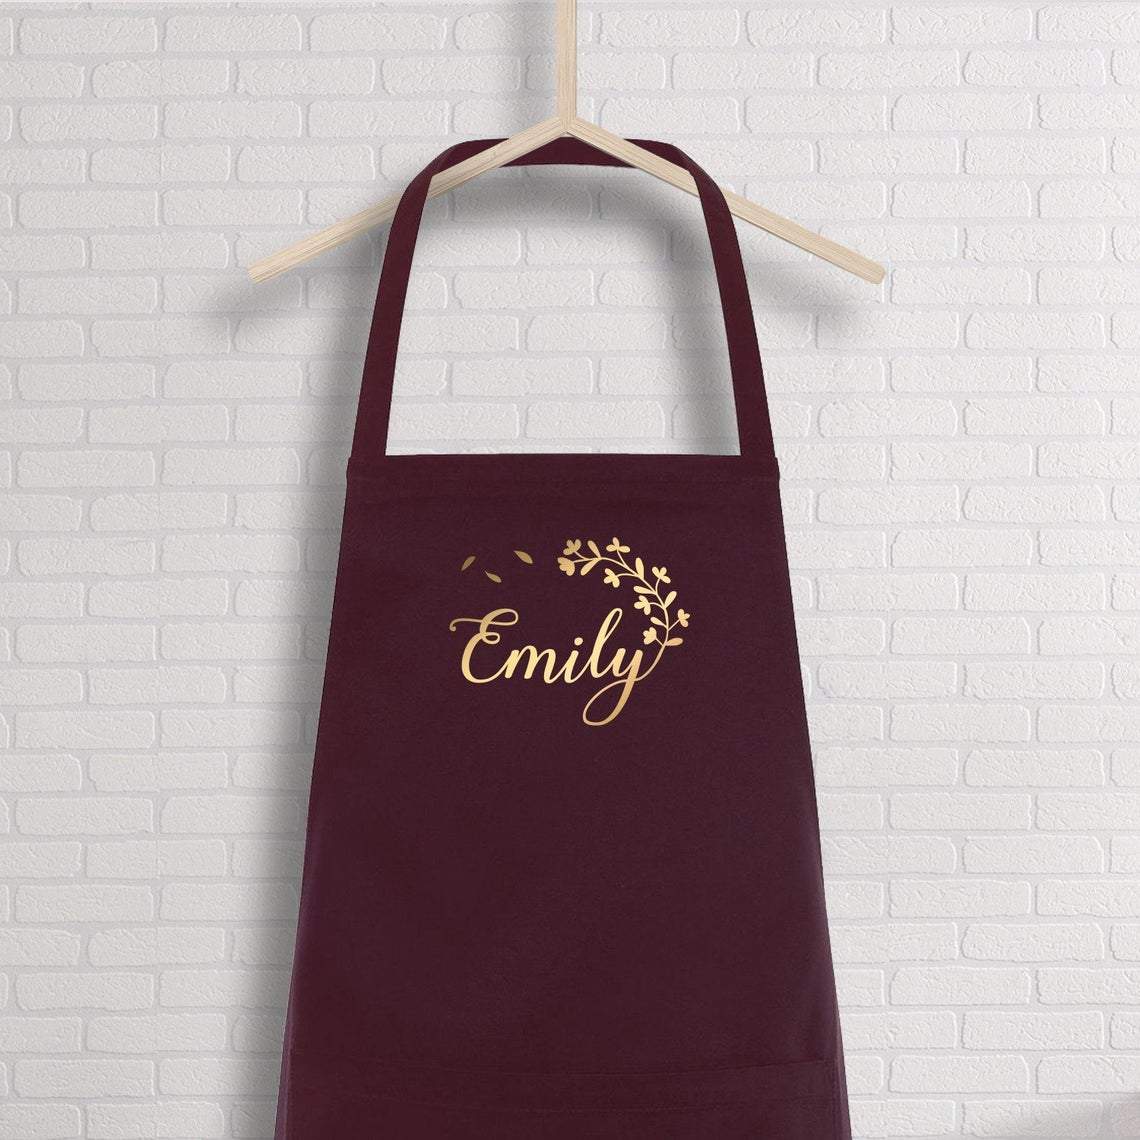 Personalised Apron With Name, Name Kitchen Apron For Women, Bakers Gift